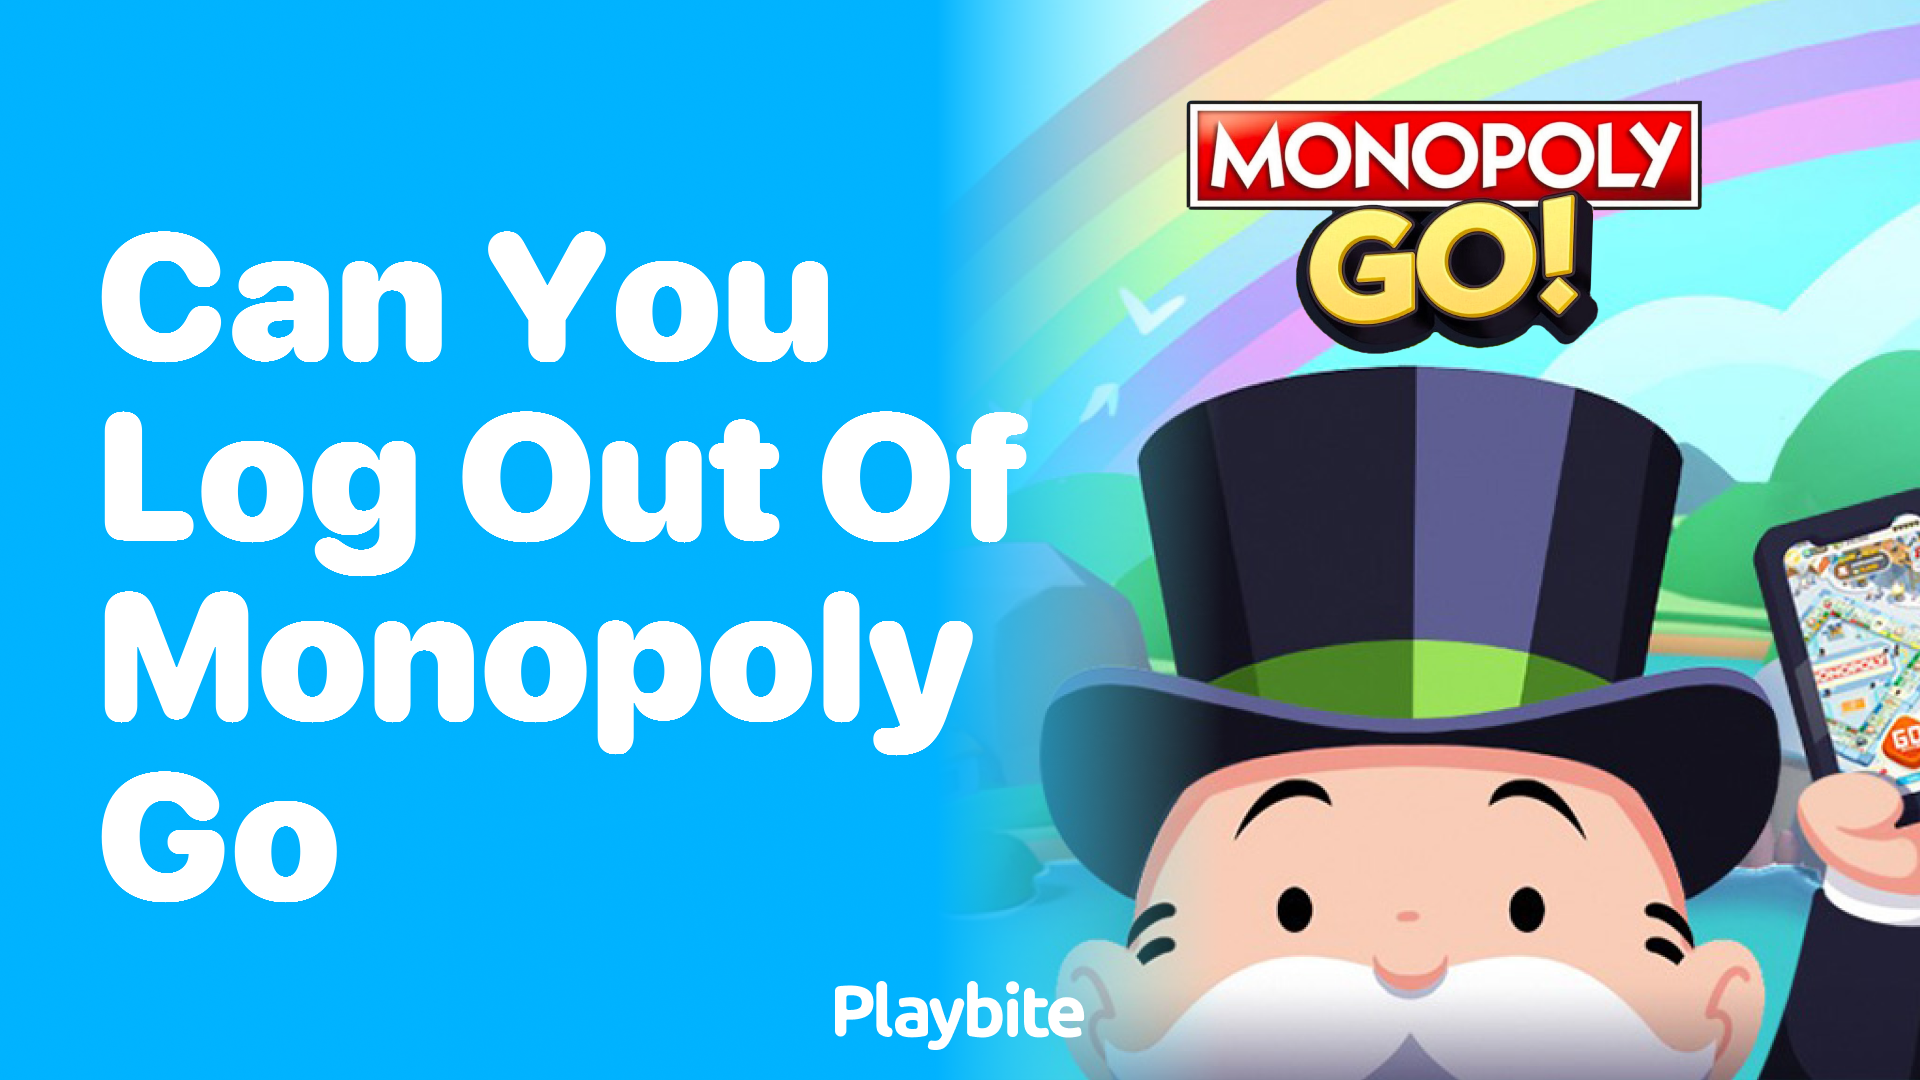 Can You Log Out of Monopoly Go? Find Out Here!